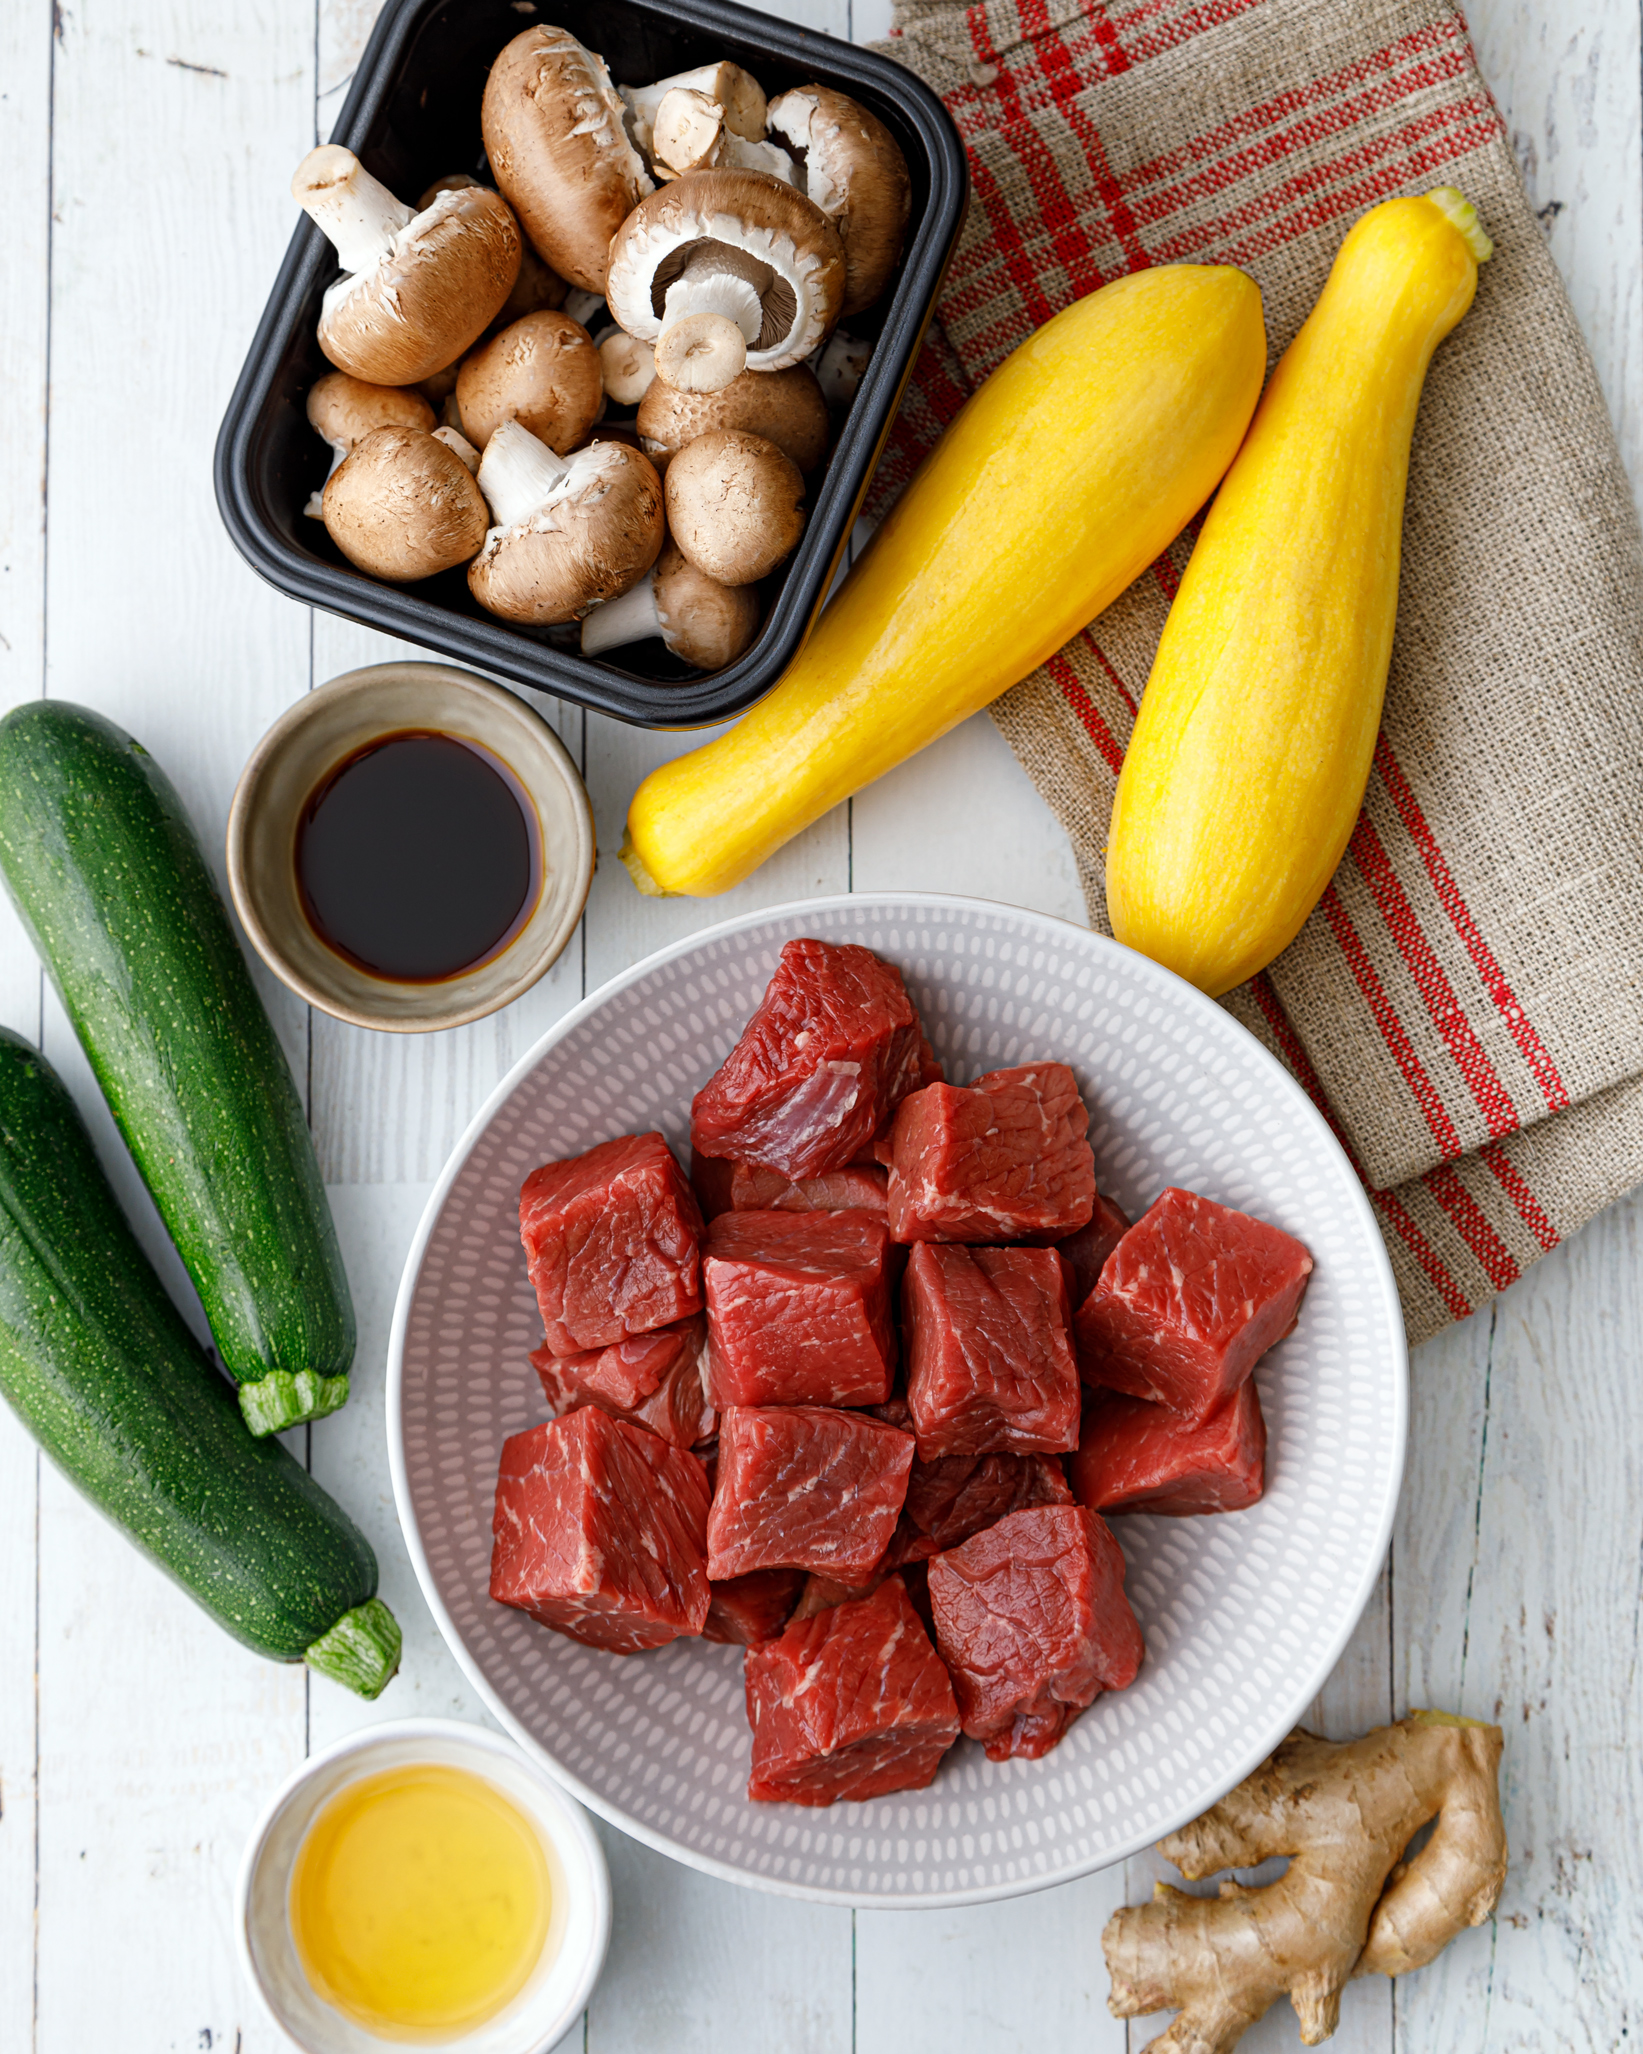 all the ingredients to make our beef kabobs, a white bowl filled with cubes of raw beef, two whole squash, two whole zucchini, a small bowl of our sweet and tangy sauce, and a carton of mushrooms